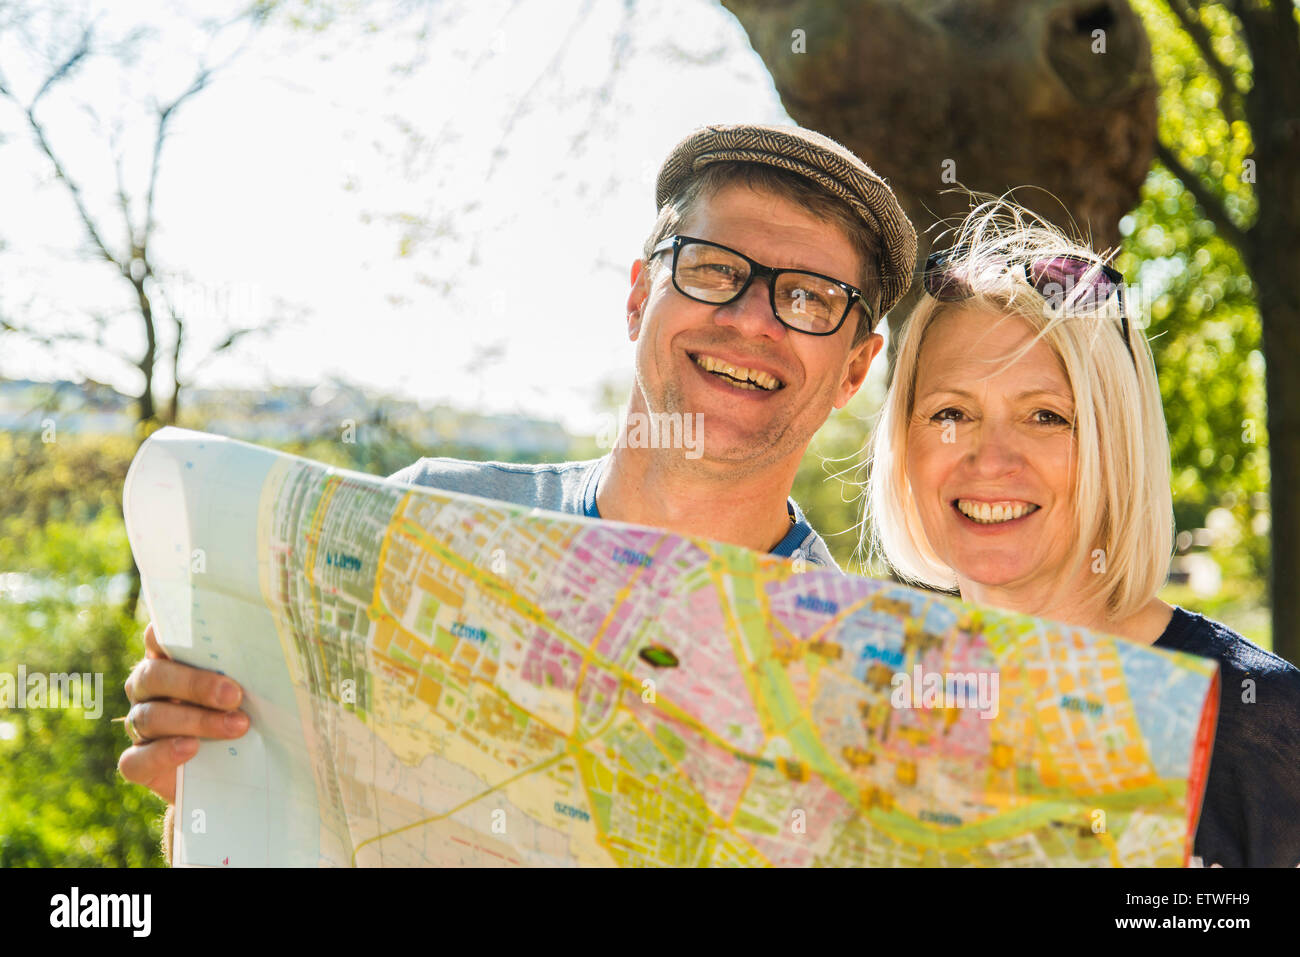 Germany, Mannheim, Mature couple taking city break, looking at map Stock Photo